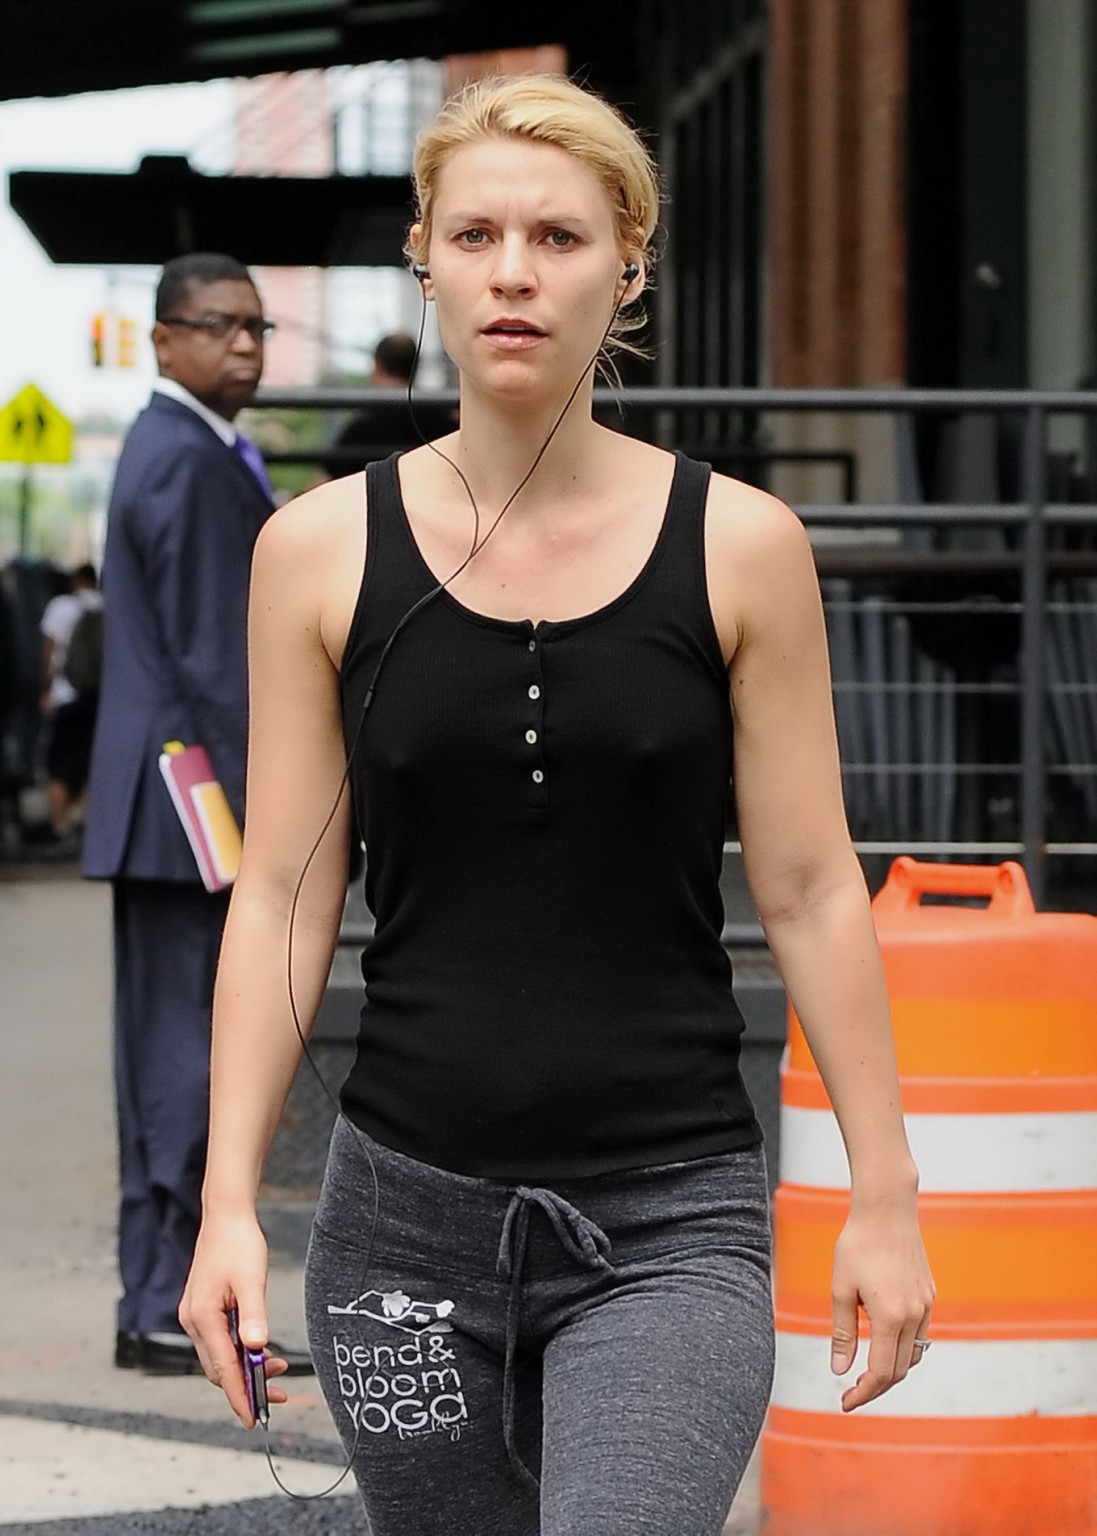 Claire Danes shows hard pokies braless wearing skimpy top  leggings after a yoga #75243951